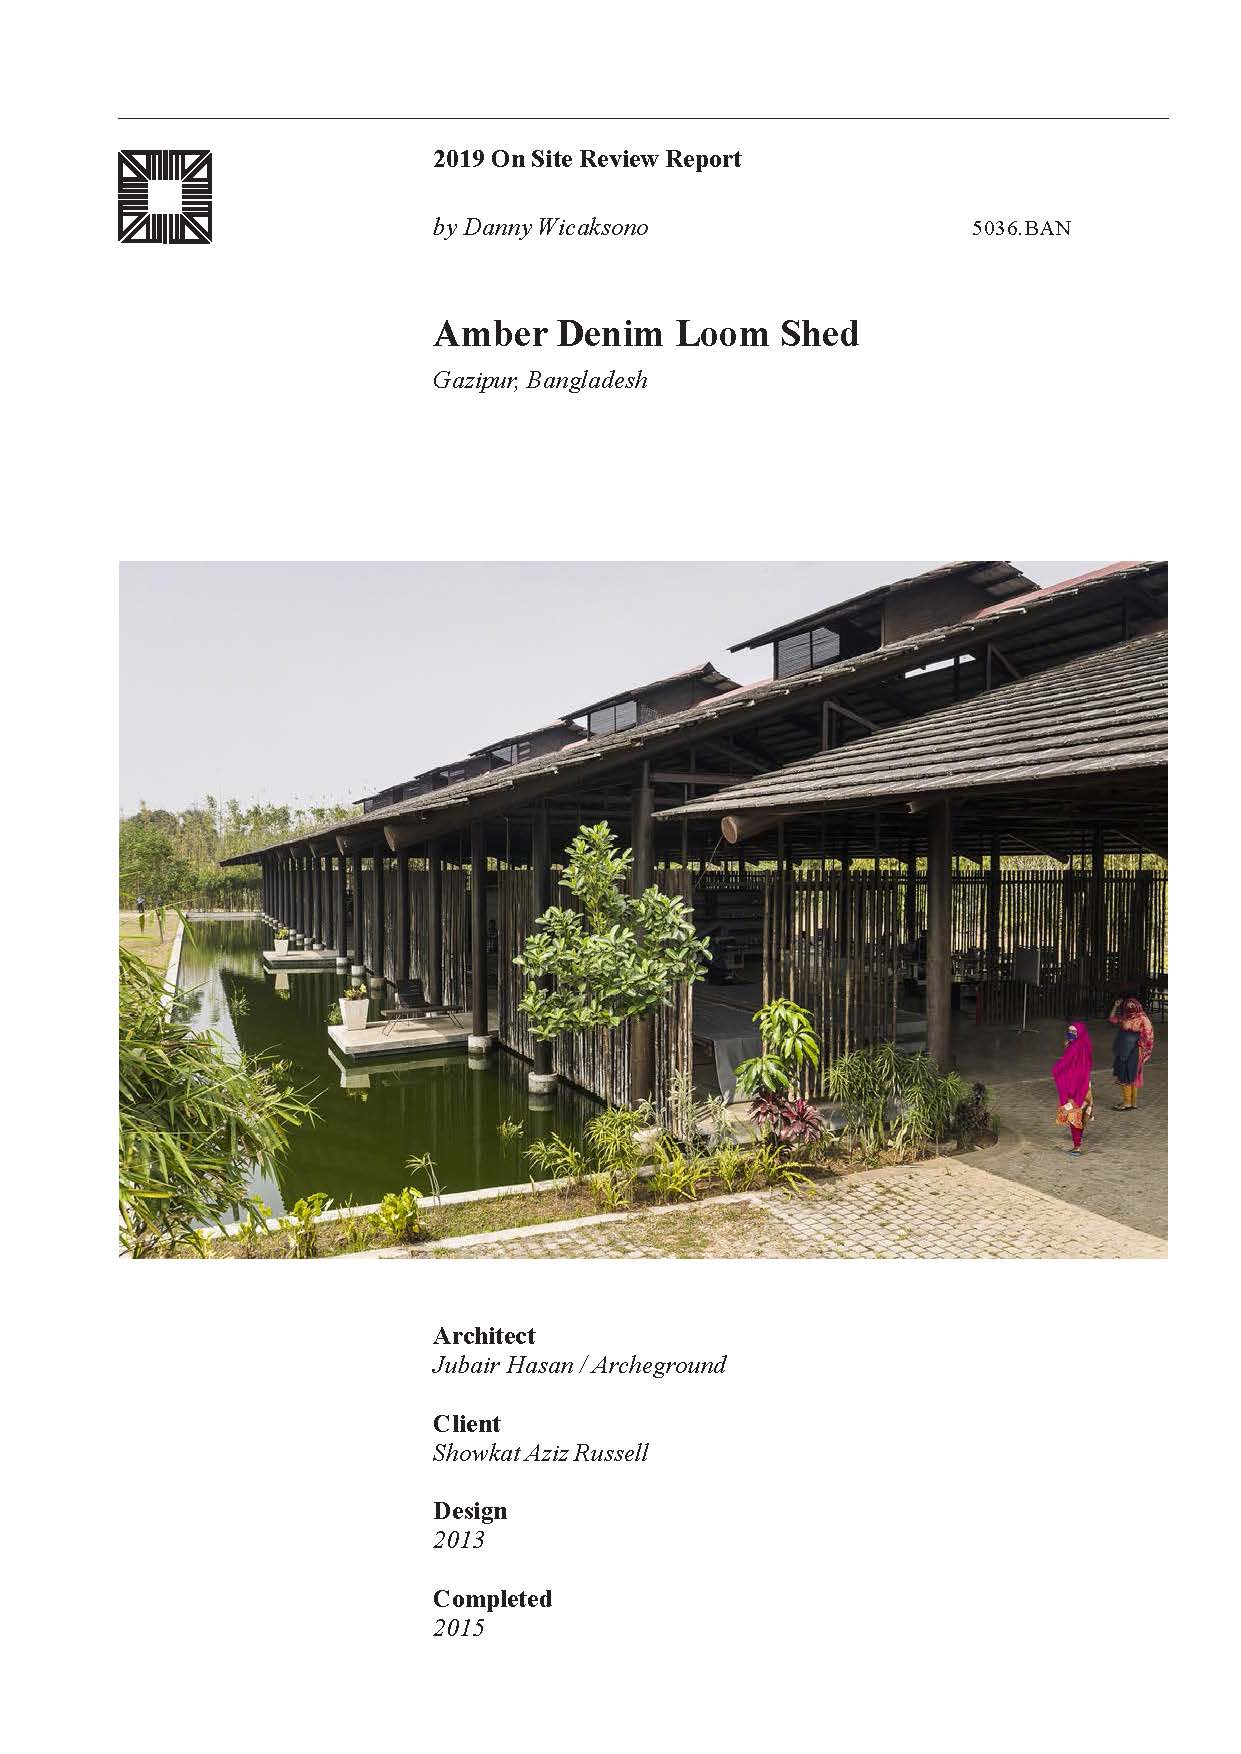 Amber Denim Loom Shed On-site Review Report